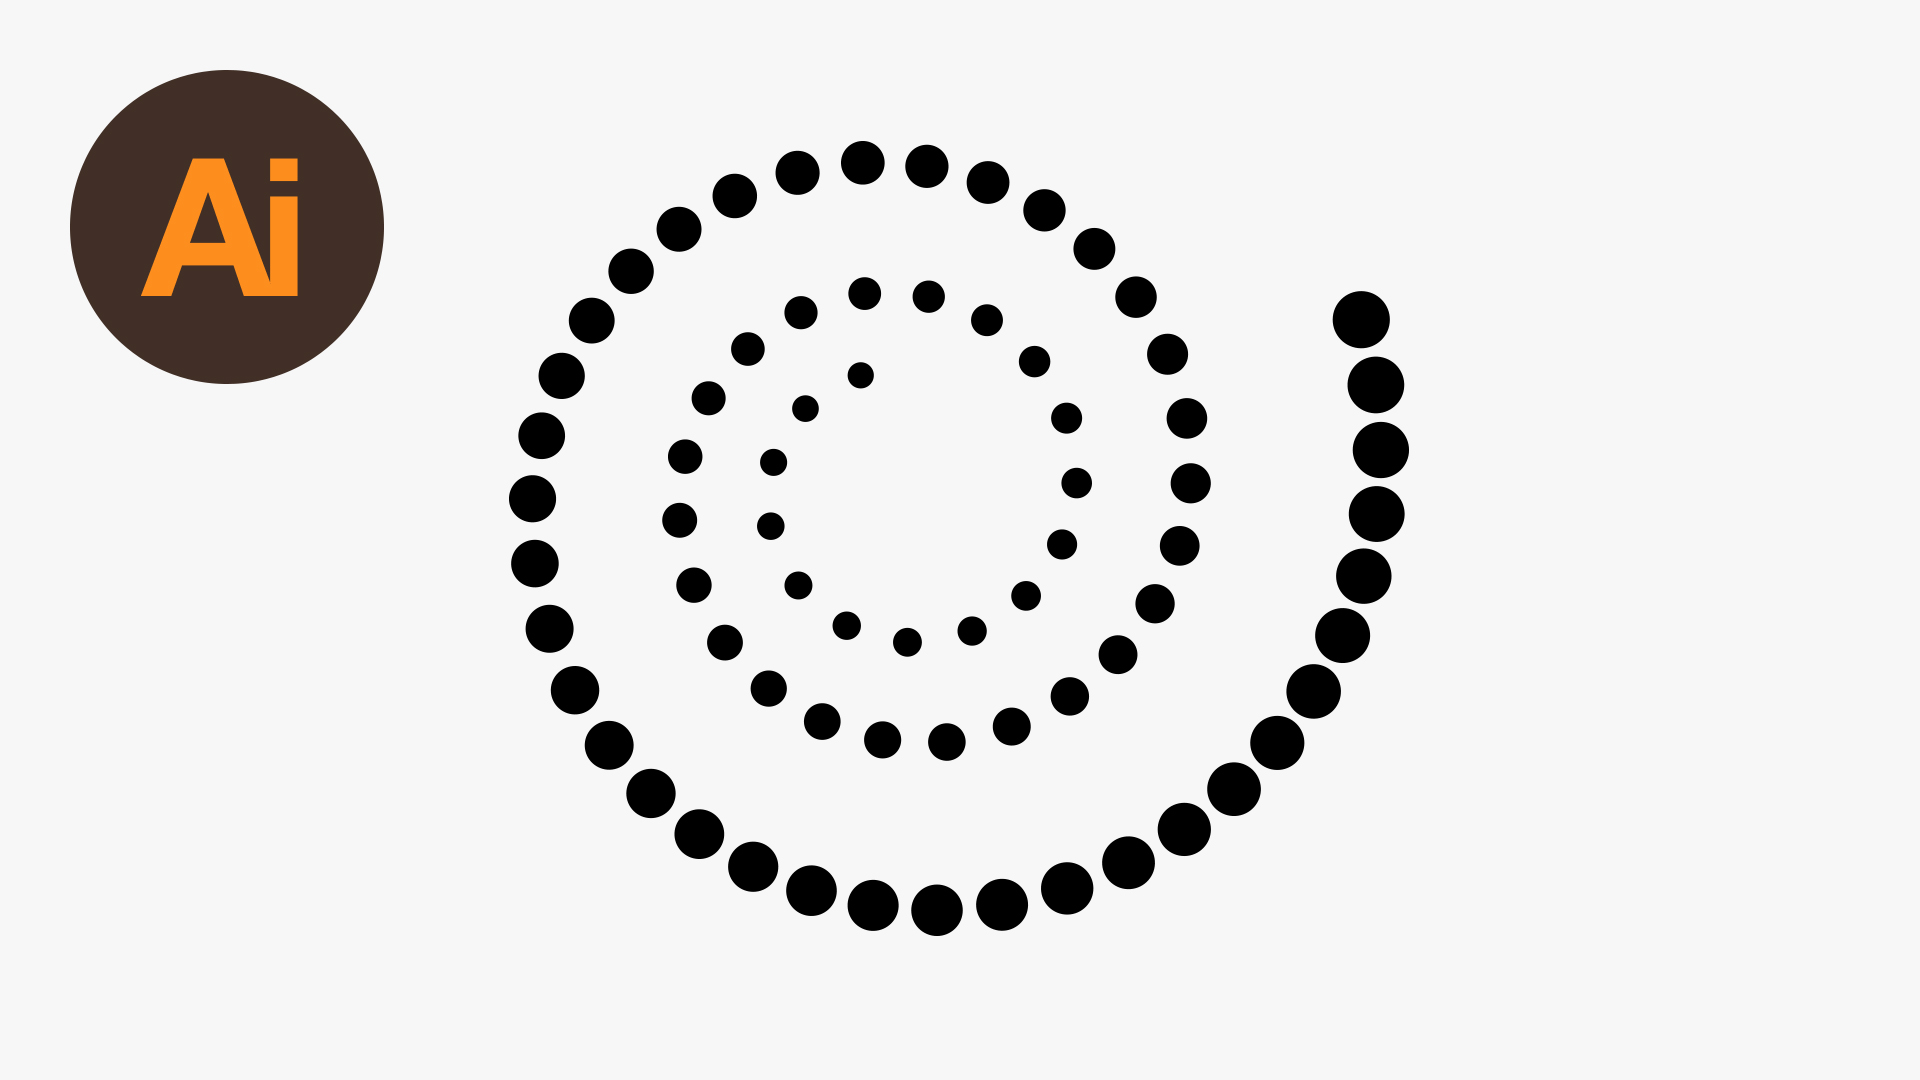 Create Dots on Spiral Path in Illustrator